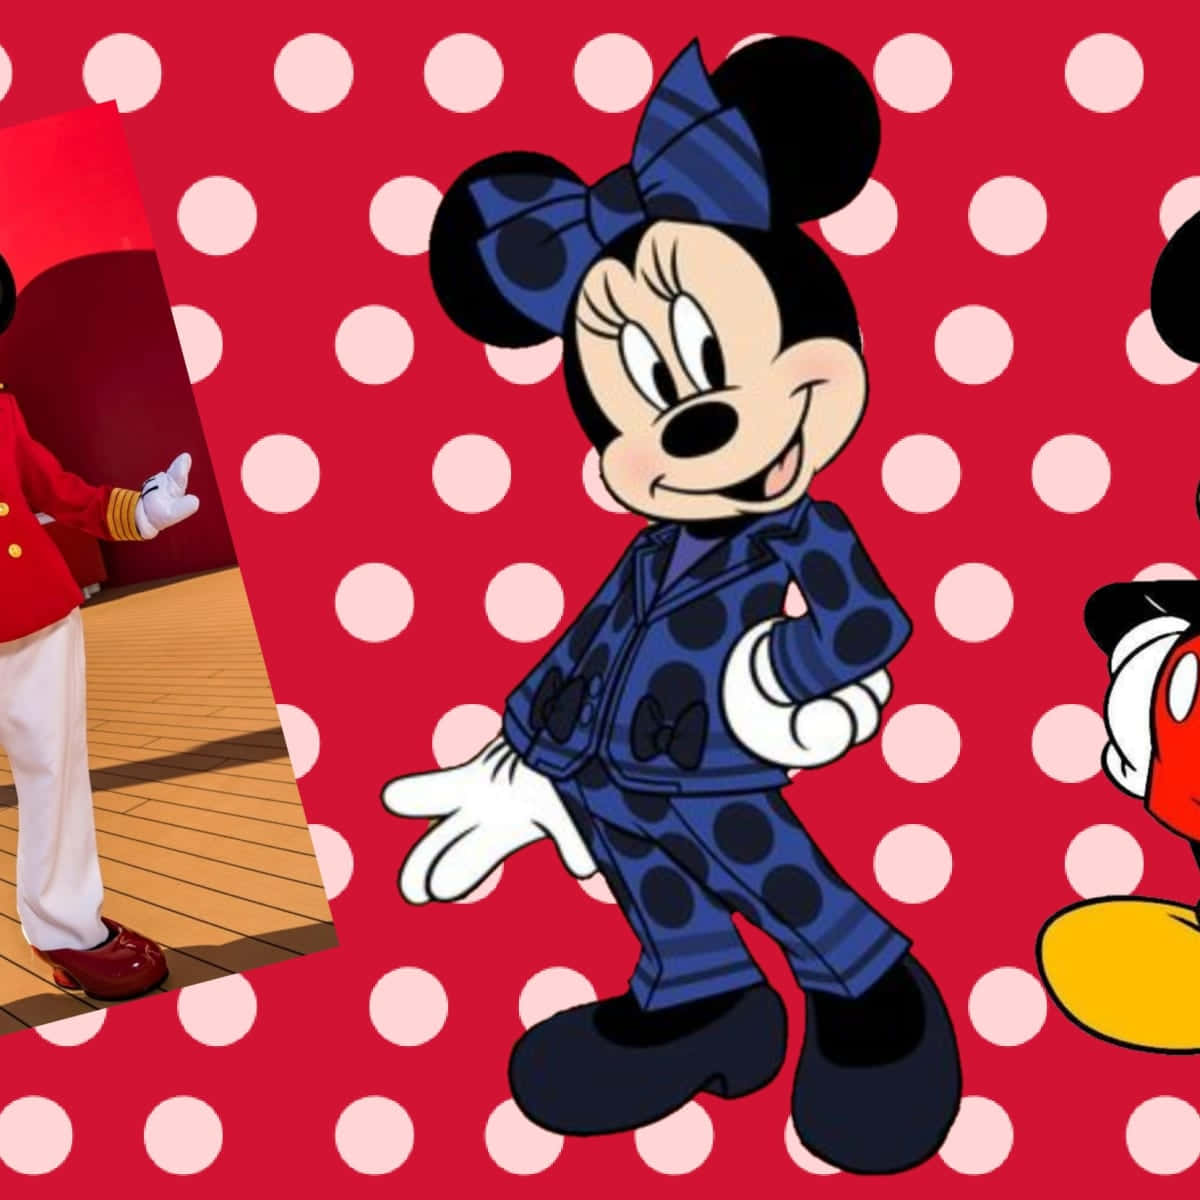 Download Minnie Mouse Strikes A Playful Pose